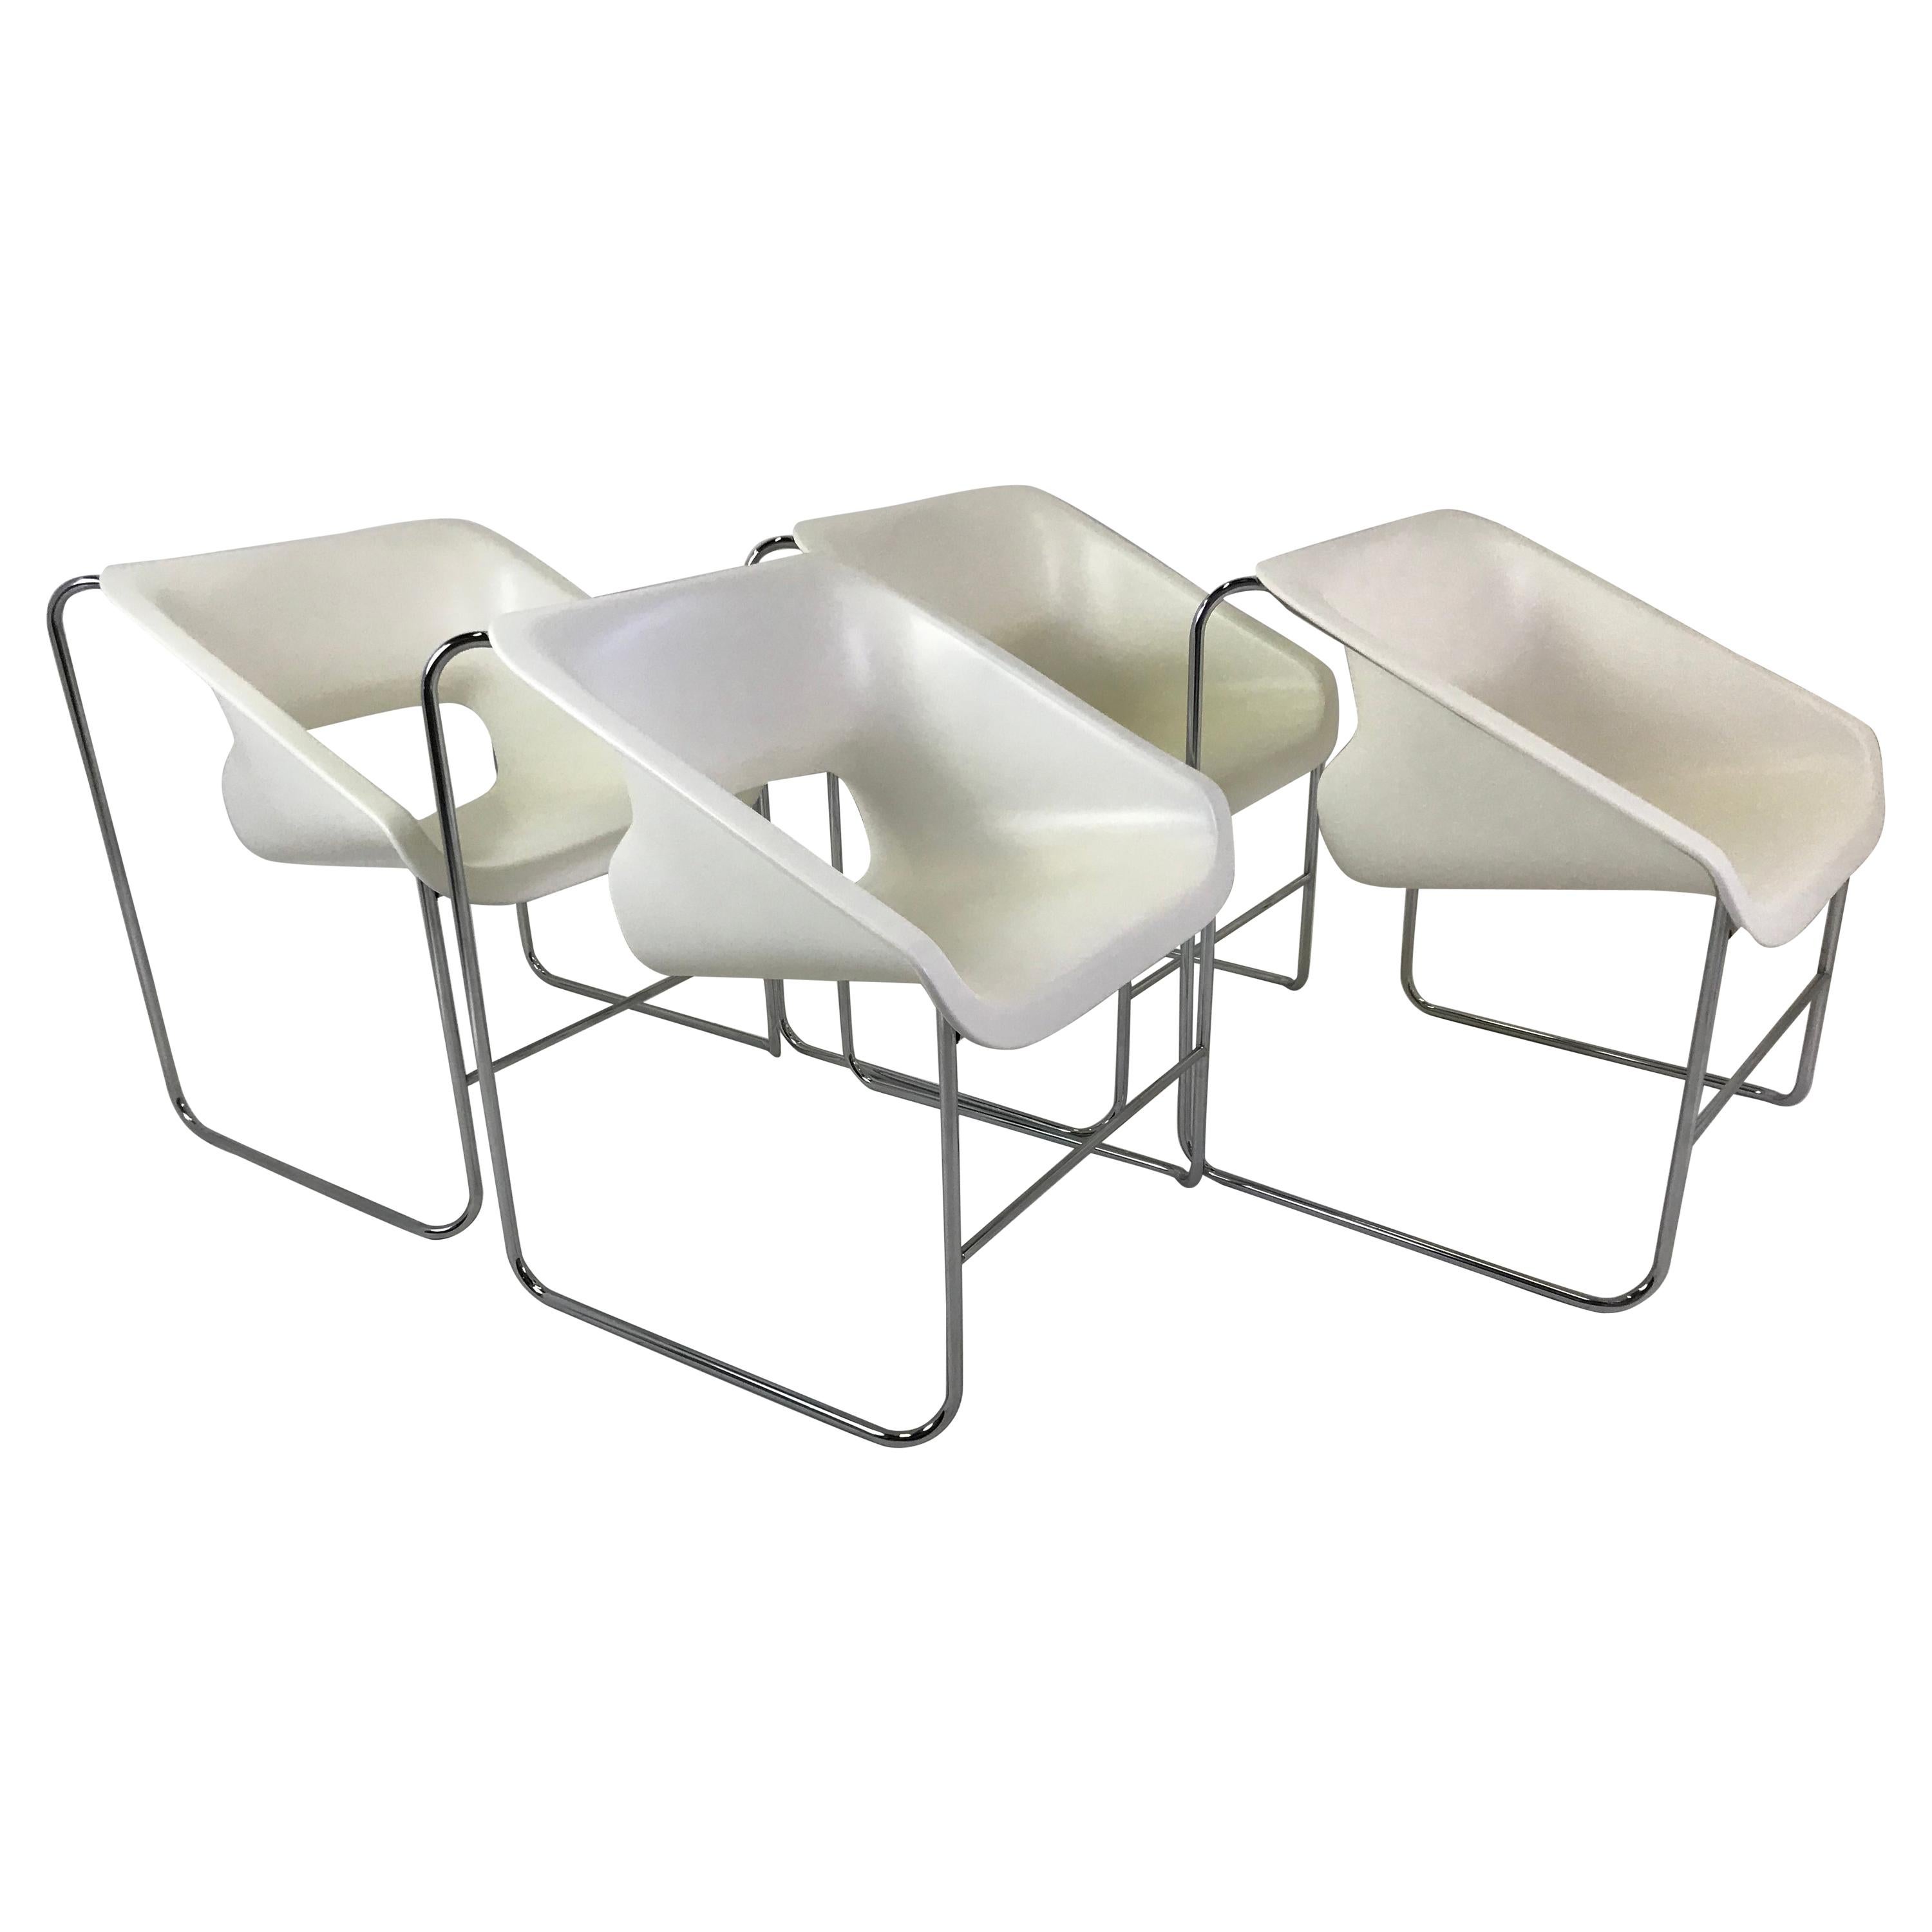 Space Modern 4 Stackable Lotus Armchairs by Paul Boulva for Artopex, Canada 1976